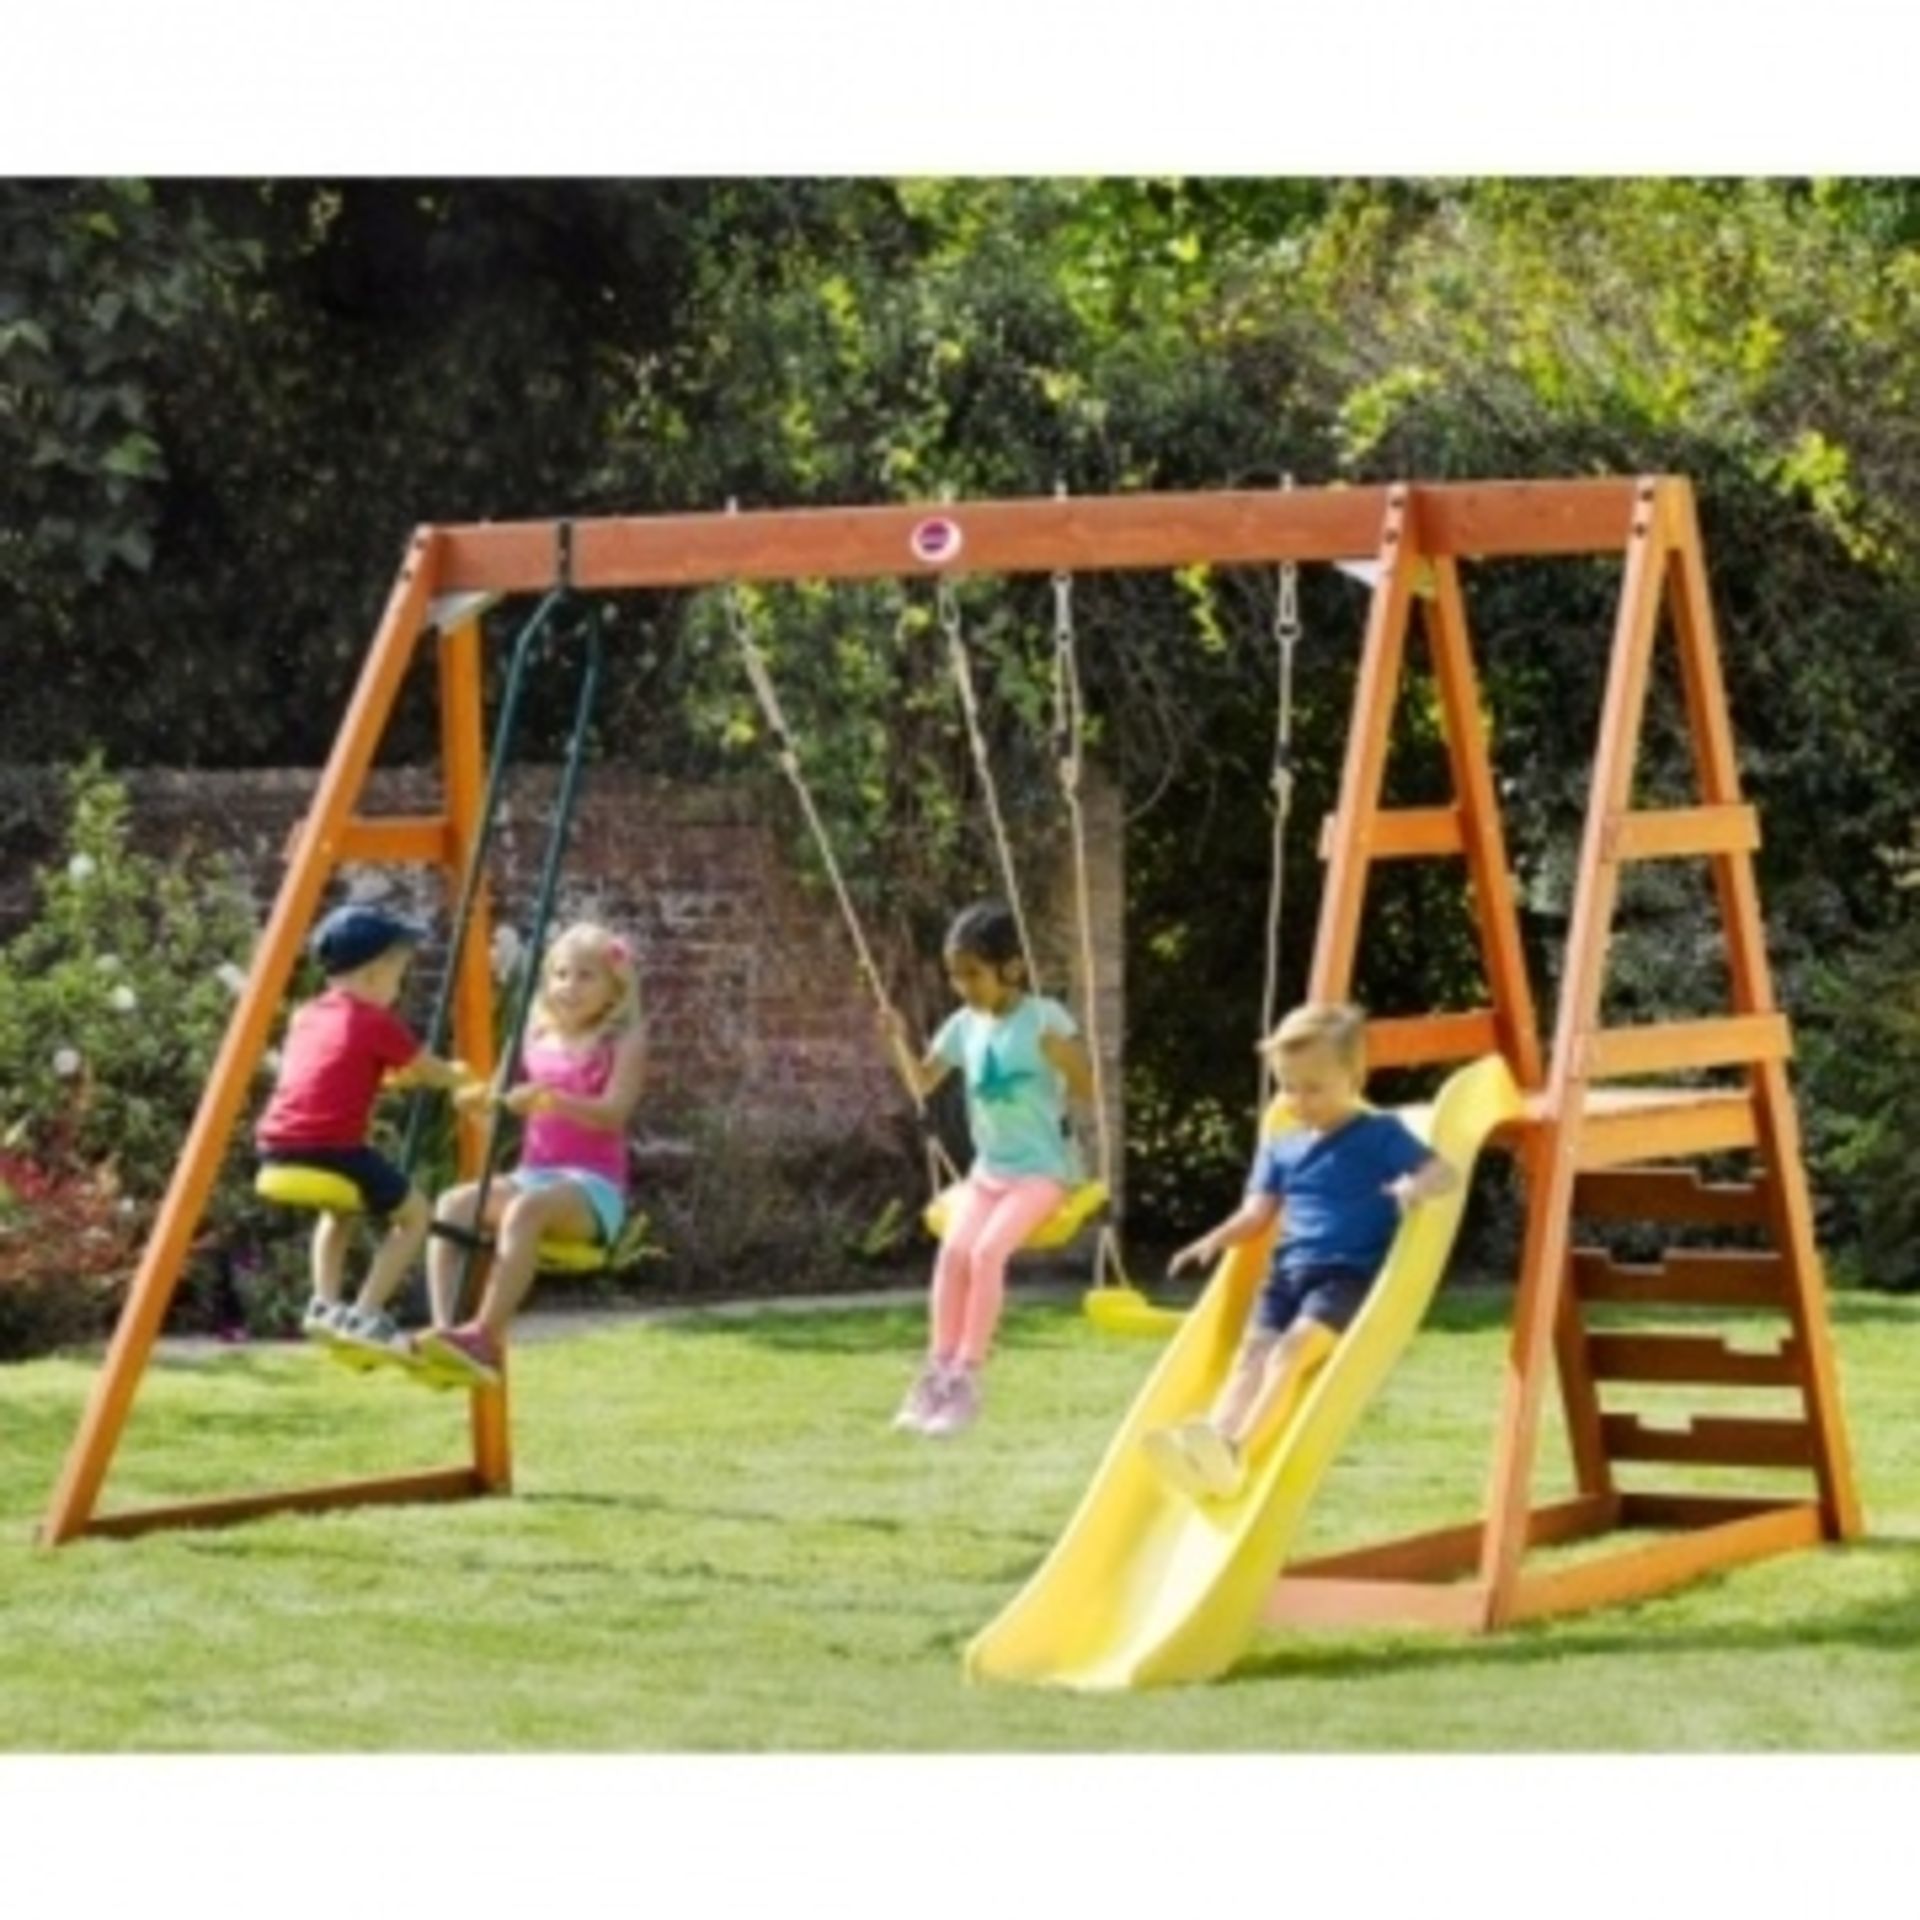 1 x Plum Products Mandrill Wooden Outdoor Play Centre. BRAND NEW. RRP £499.99 each! The Mandrill